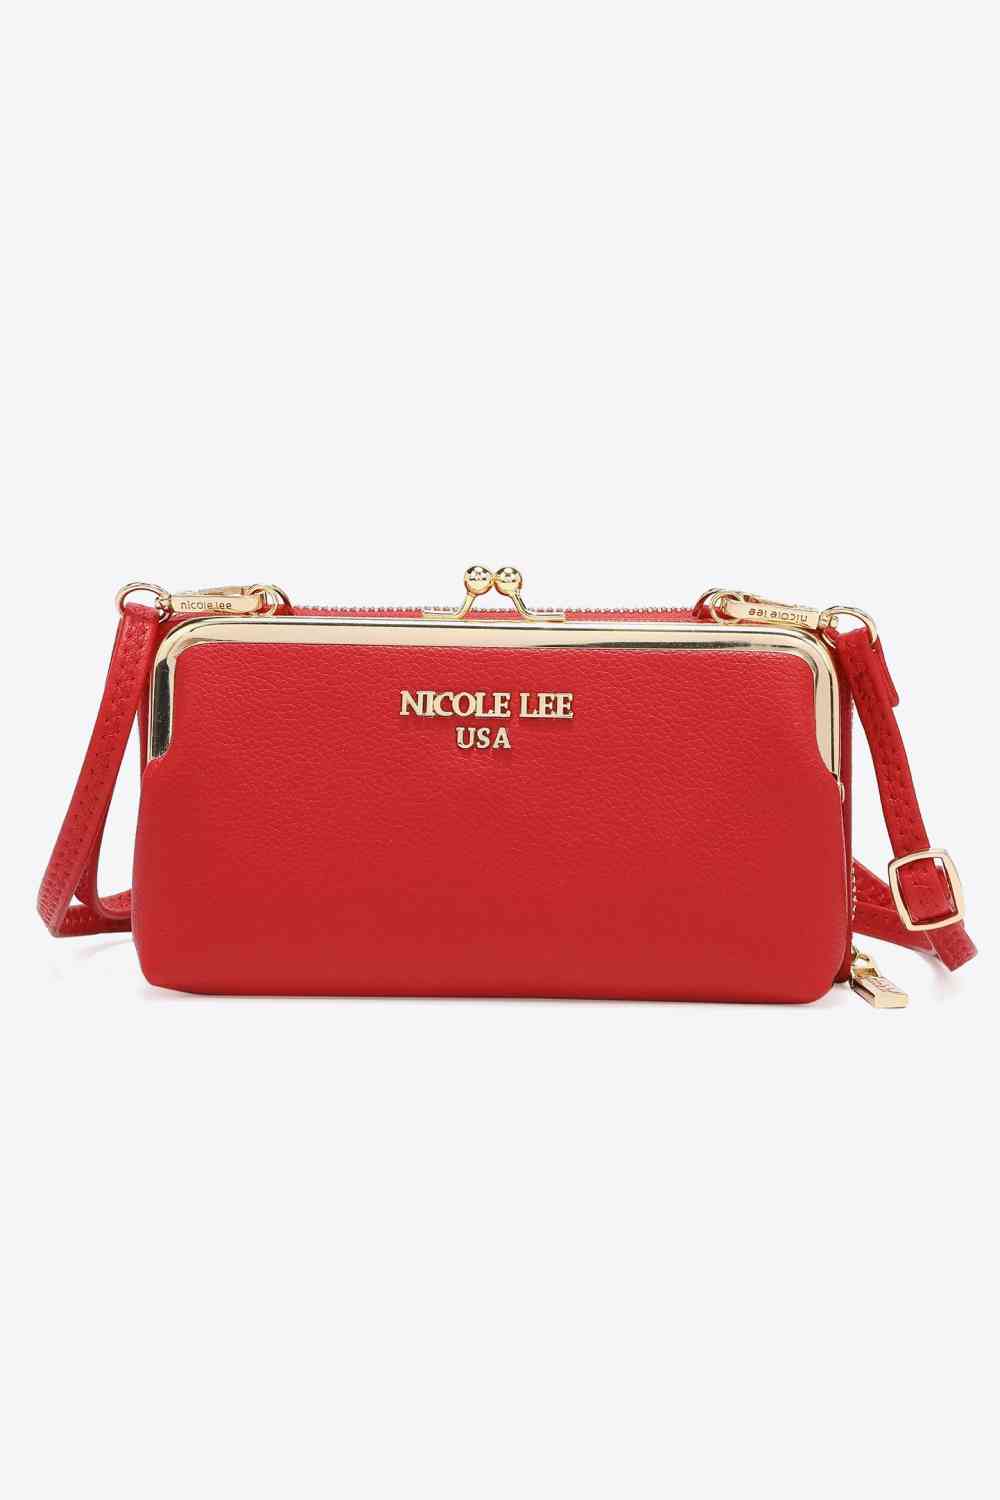 Nicole Lee USA Night Out Crossbody Wallet Purse Red One Size